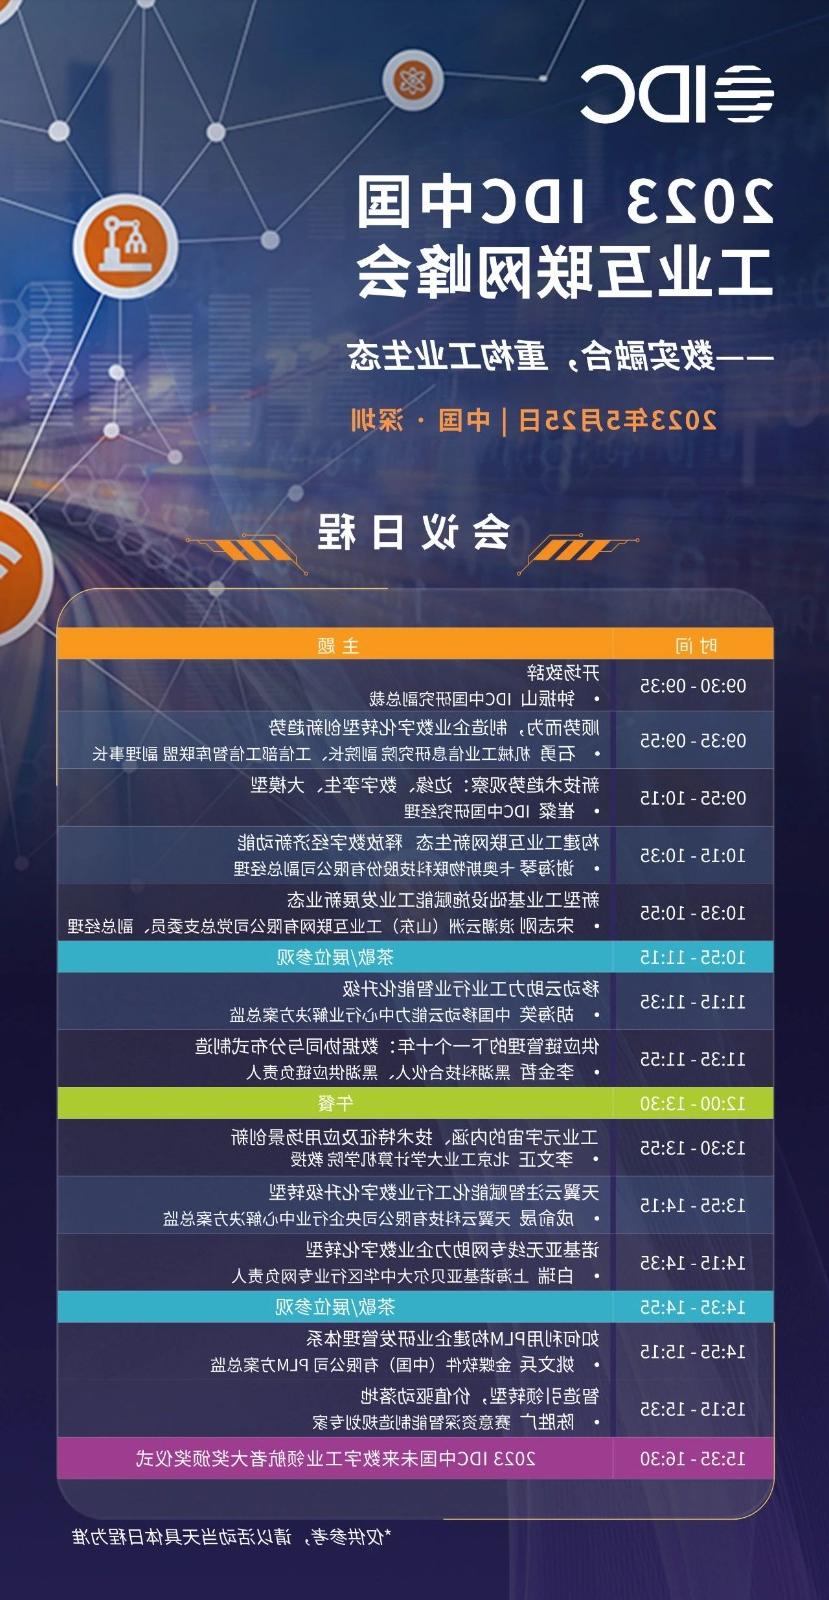 Saiyi Information was invited to attend the IDC China Industrial Internet Summit